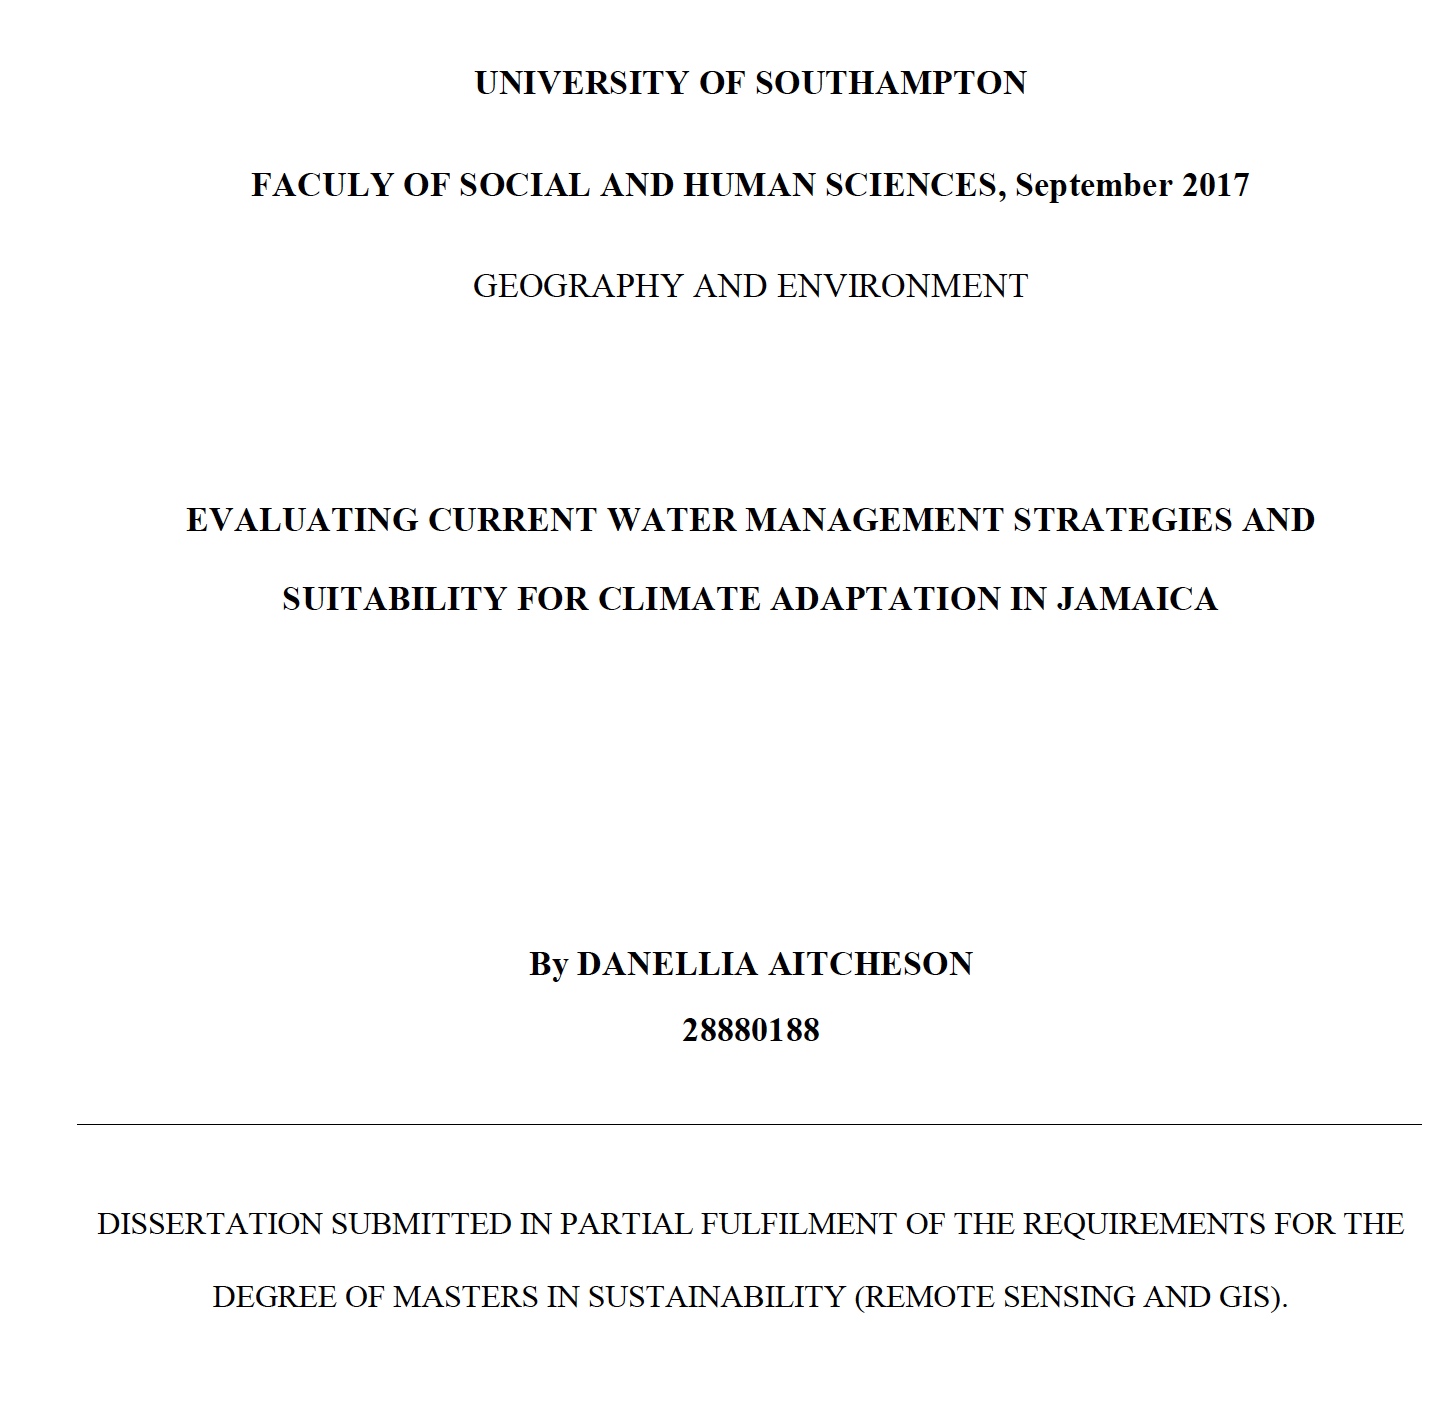 Evaluating Current Water Management Strategies and Suitability for Climate Adaptation in Jamaica